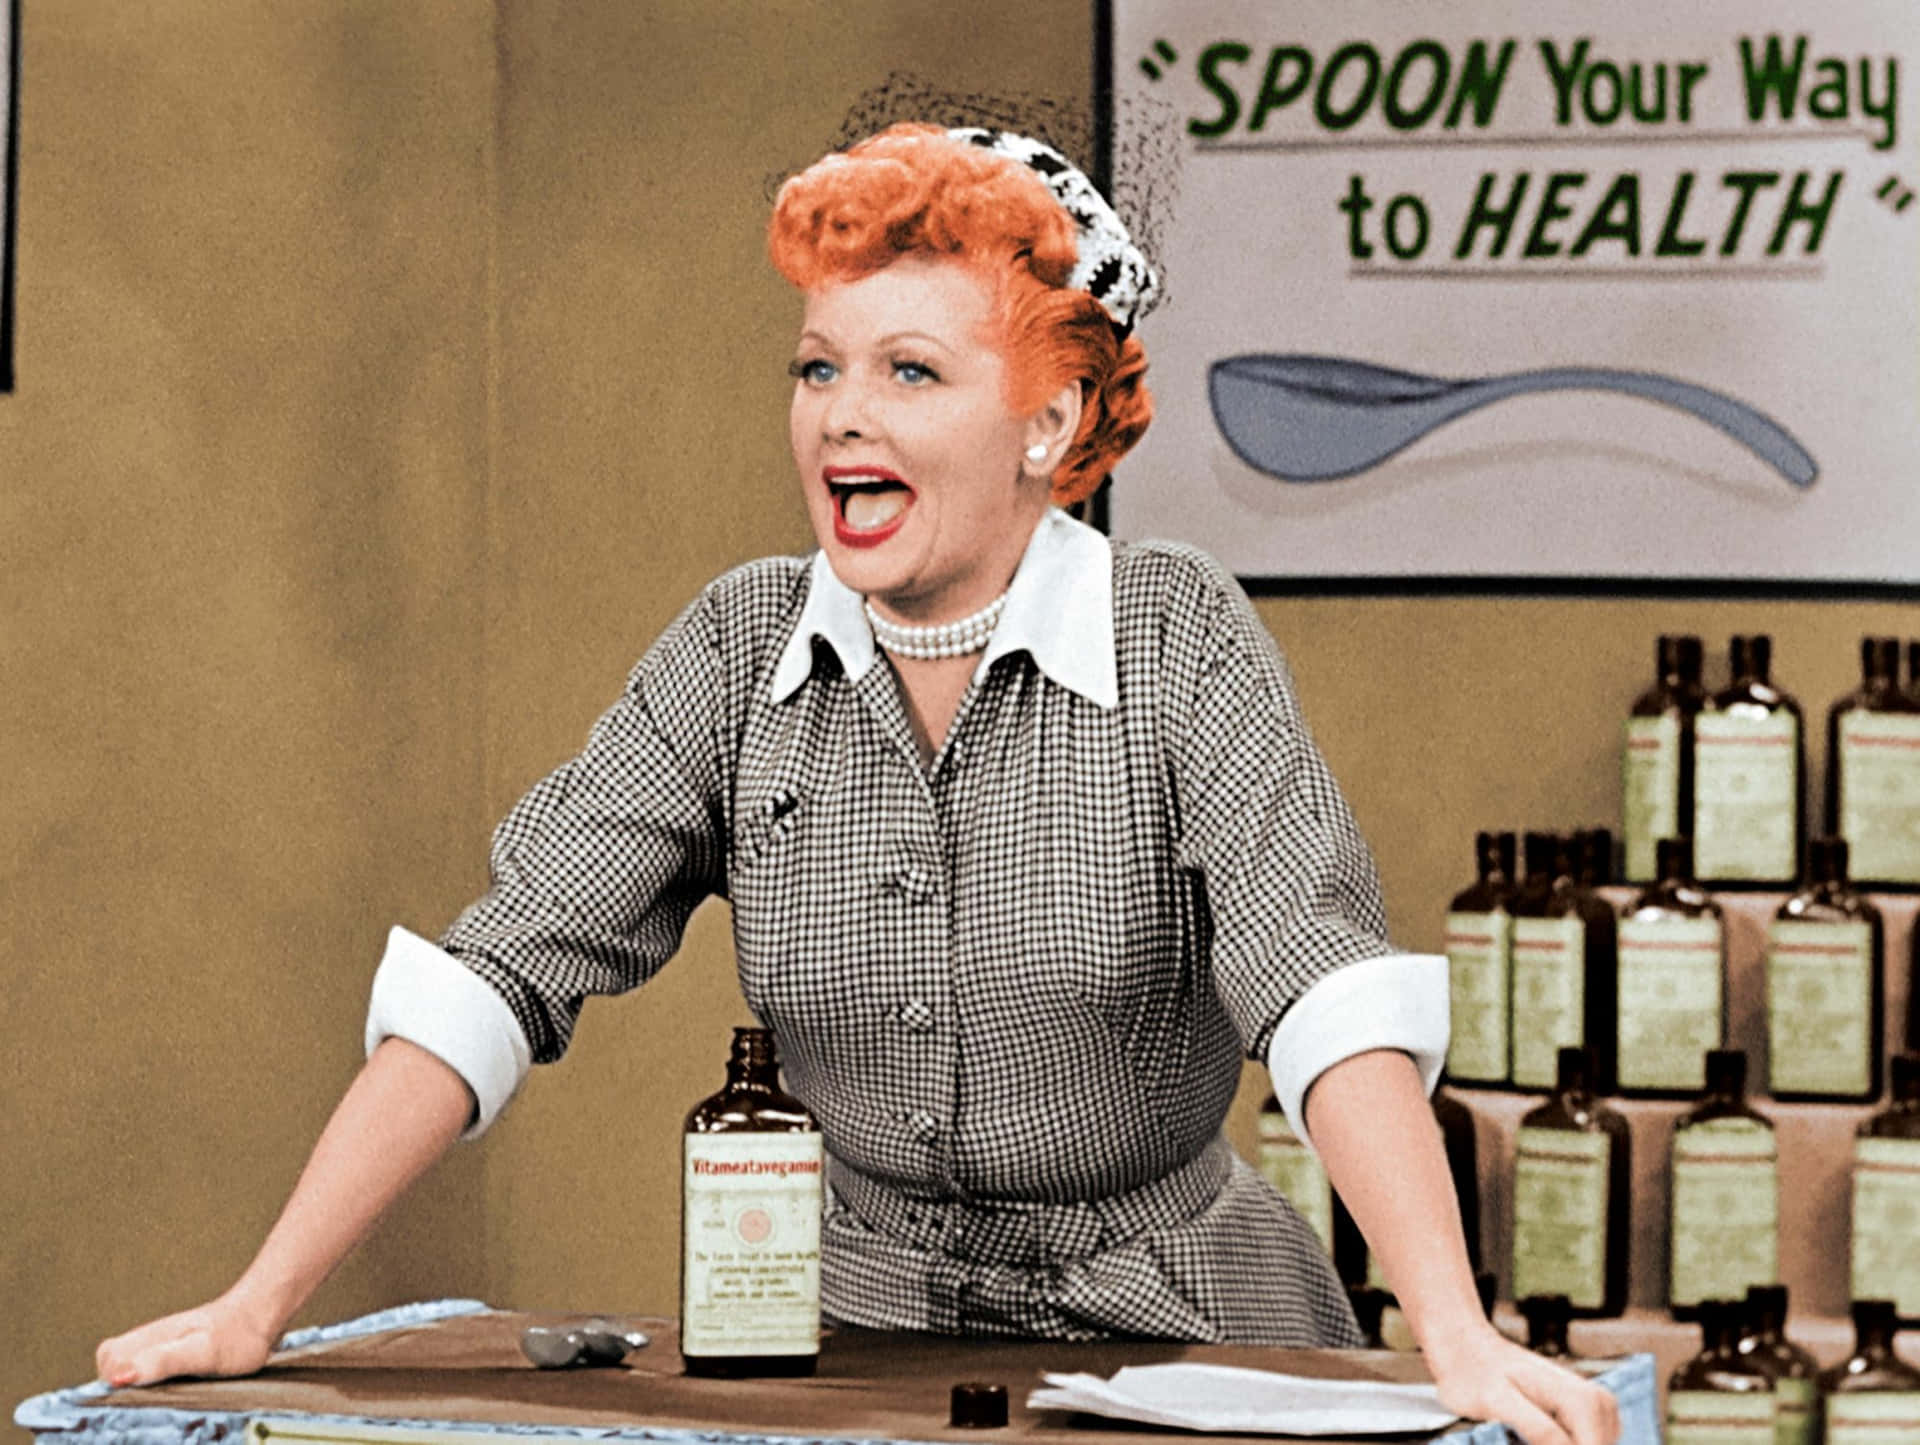 A Woman Is Standing In Front Of A Counter With Bottles Of Medicine